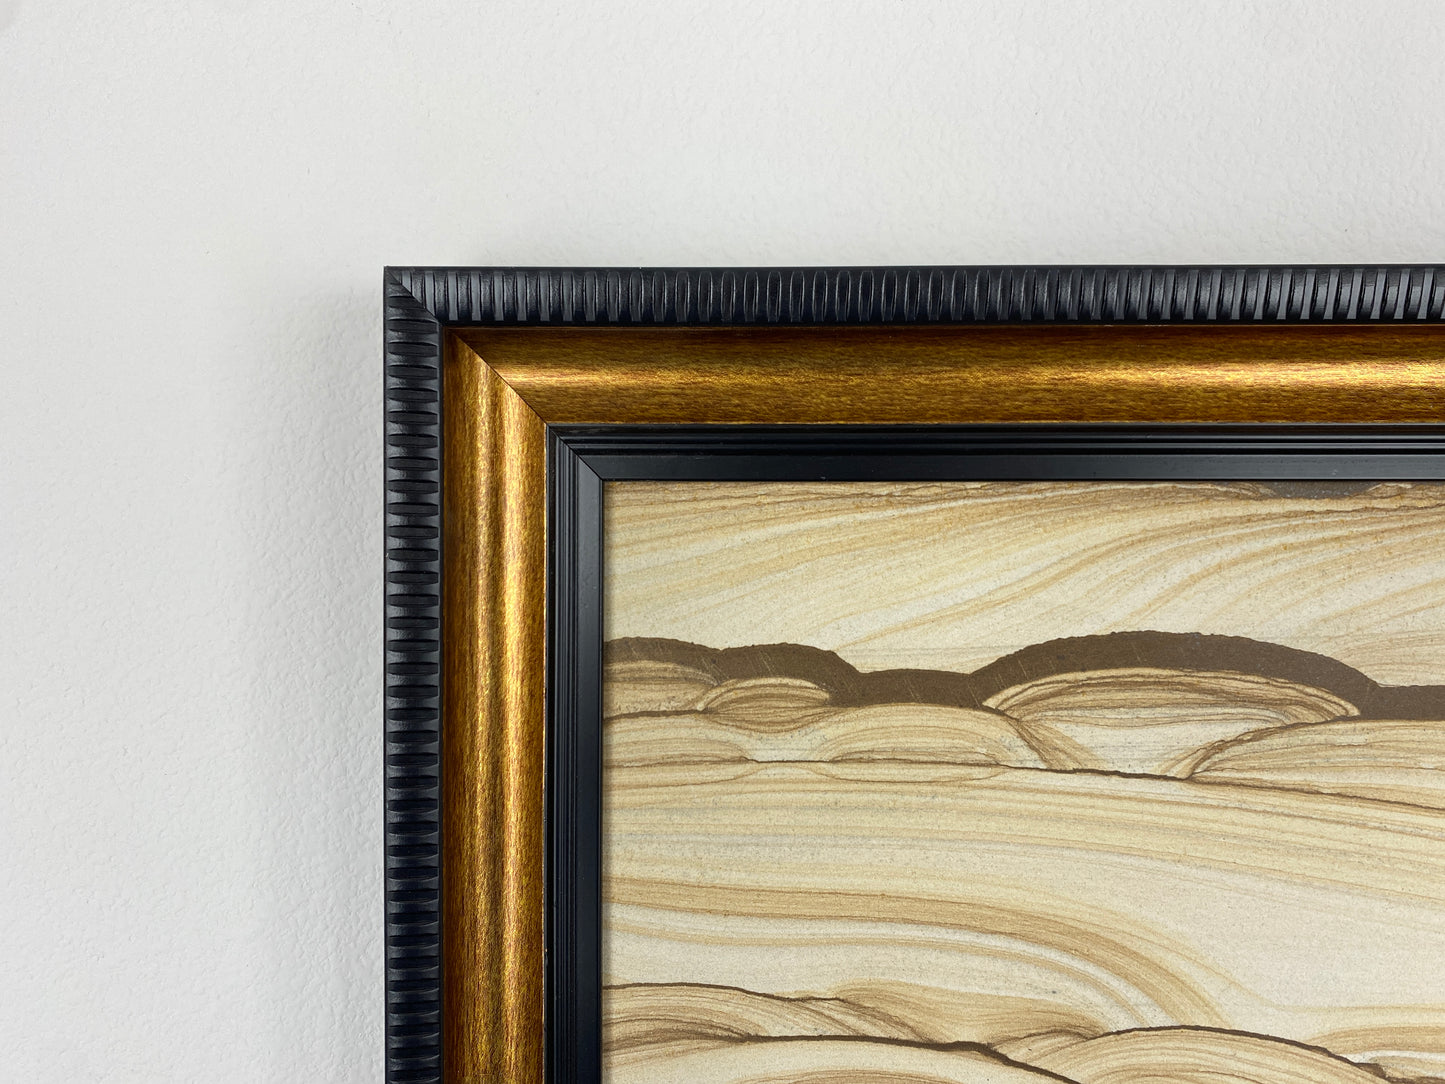 Contemporary Dream Stone, Extraordinary Natural Sandstone Painting "Desert Dunes", Wood Pattern unique and clear